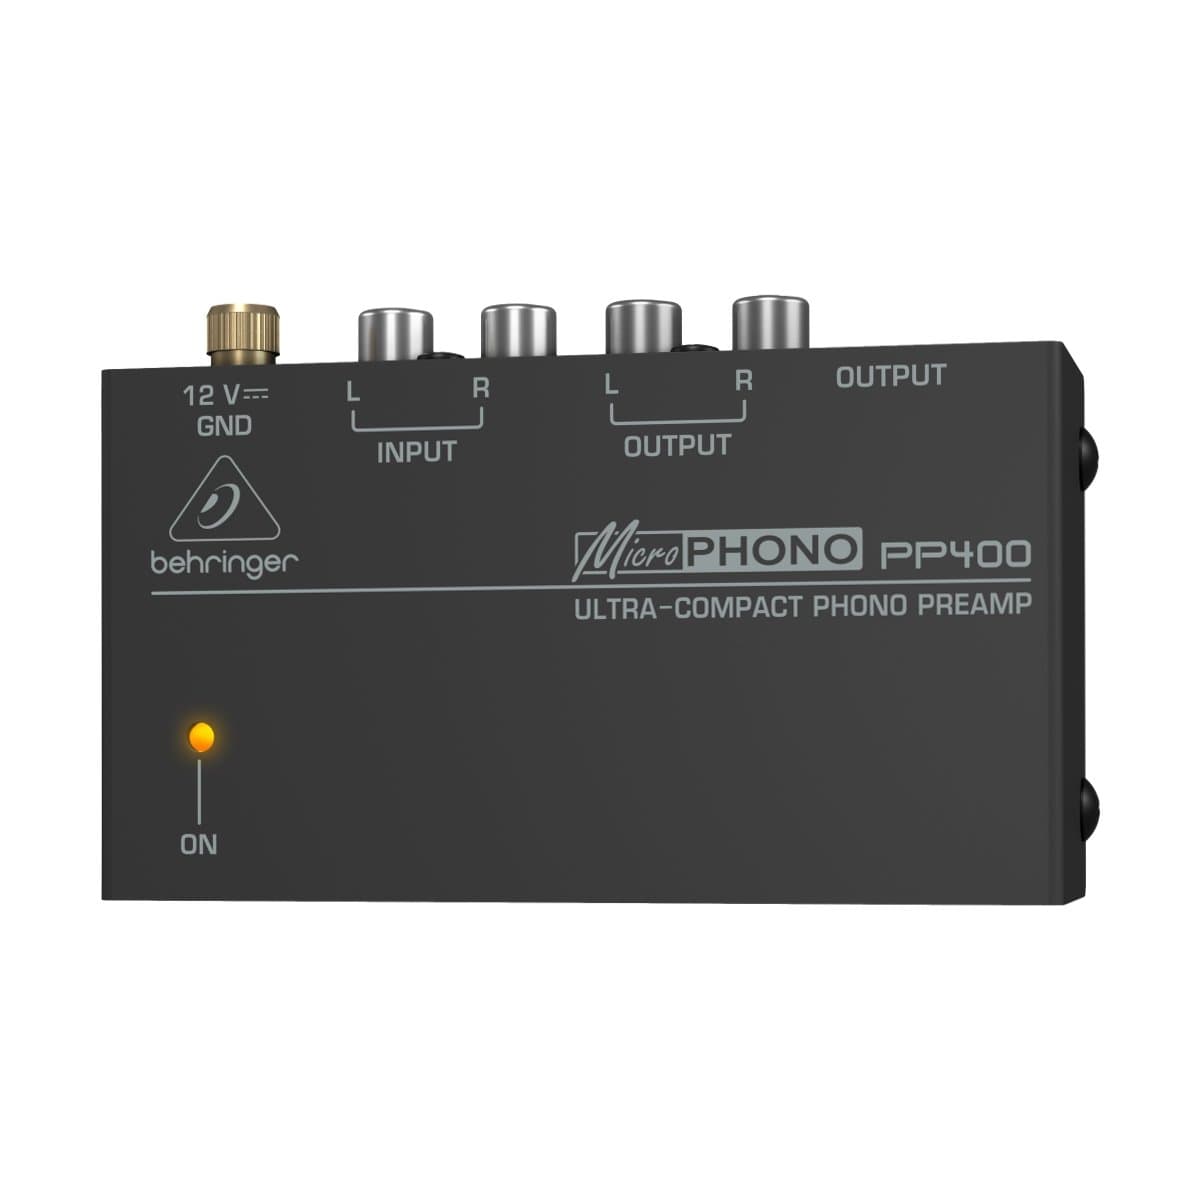 Behringer Recording Behringer Microphono PP400 Phono Preamp - Byron Music